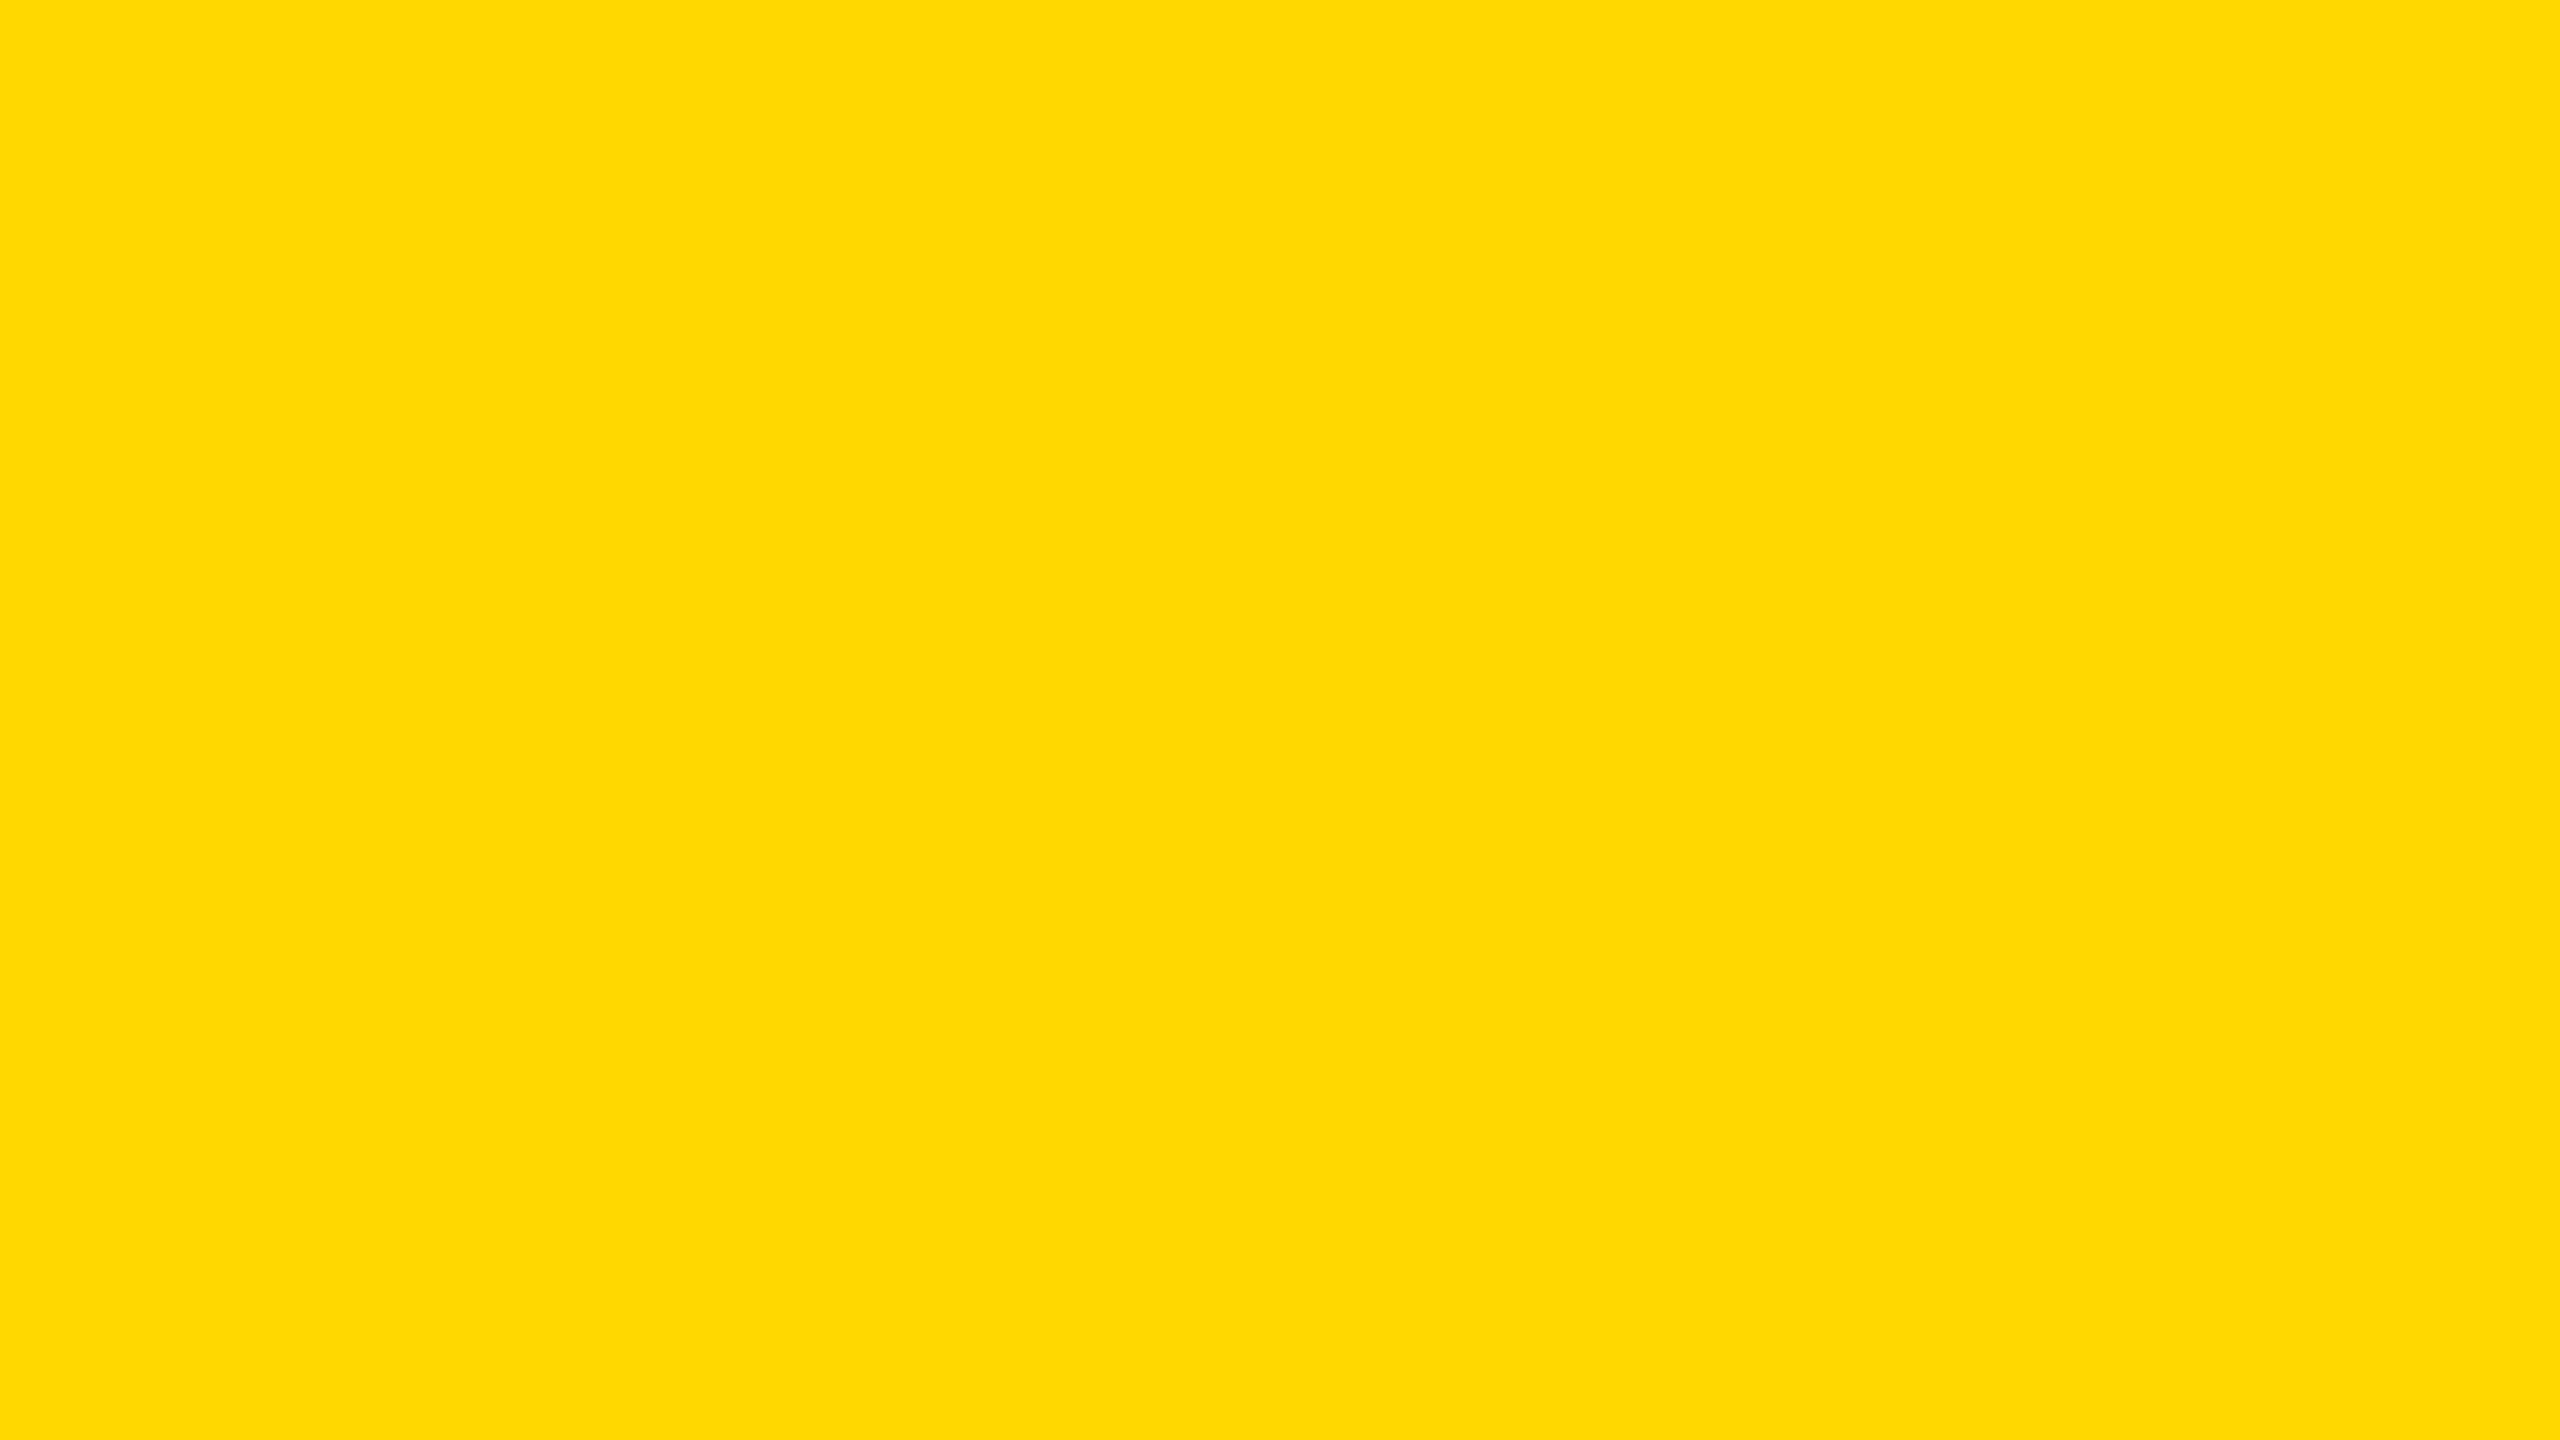 🔥 Download Background Color Solid School Yellow Background Image By